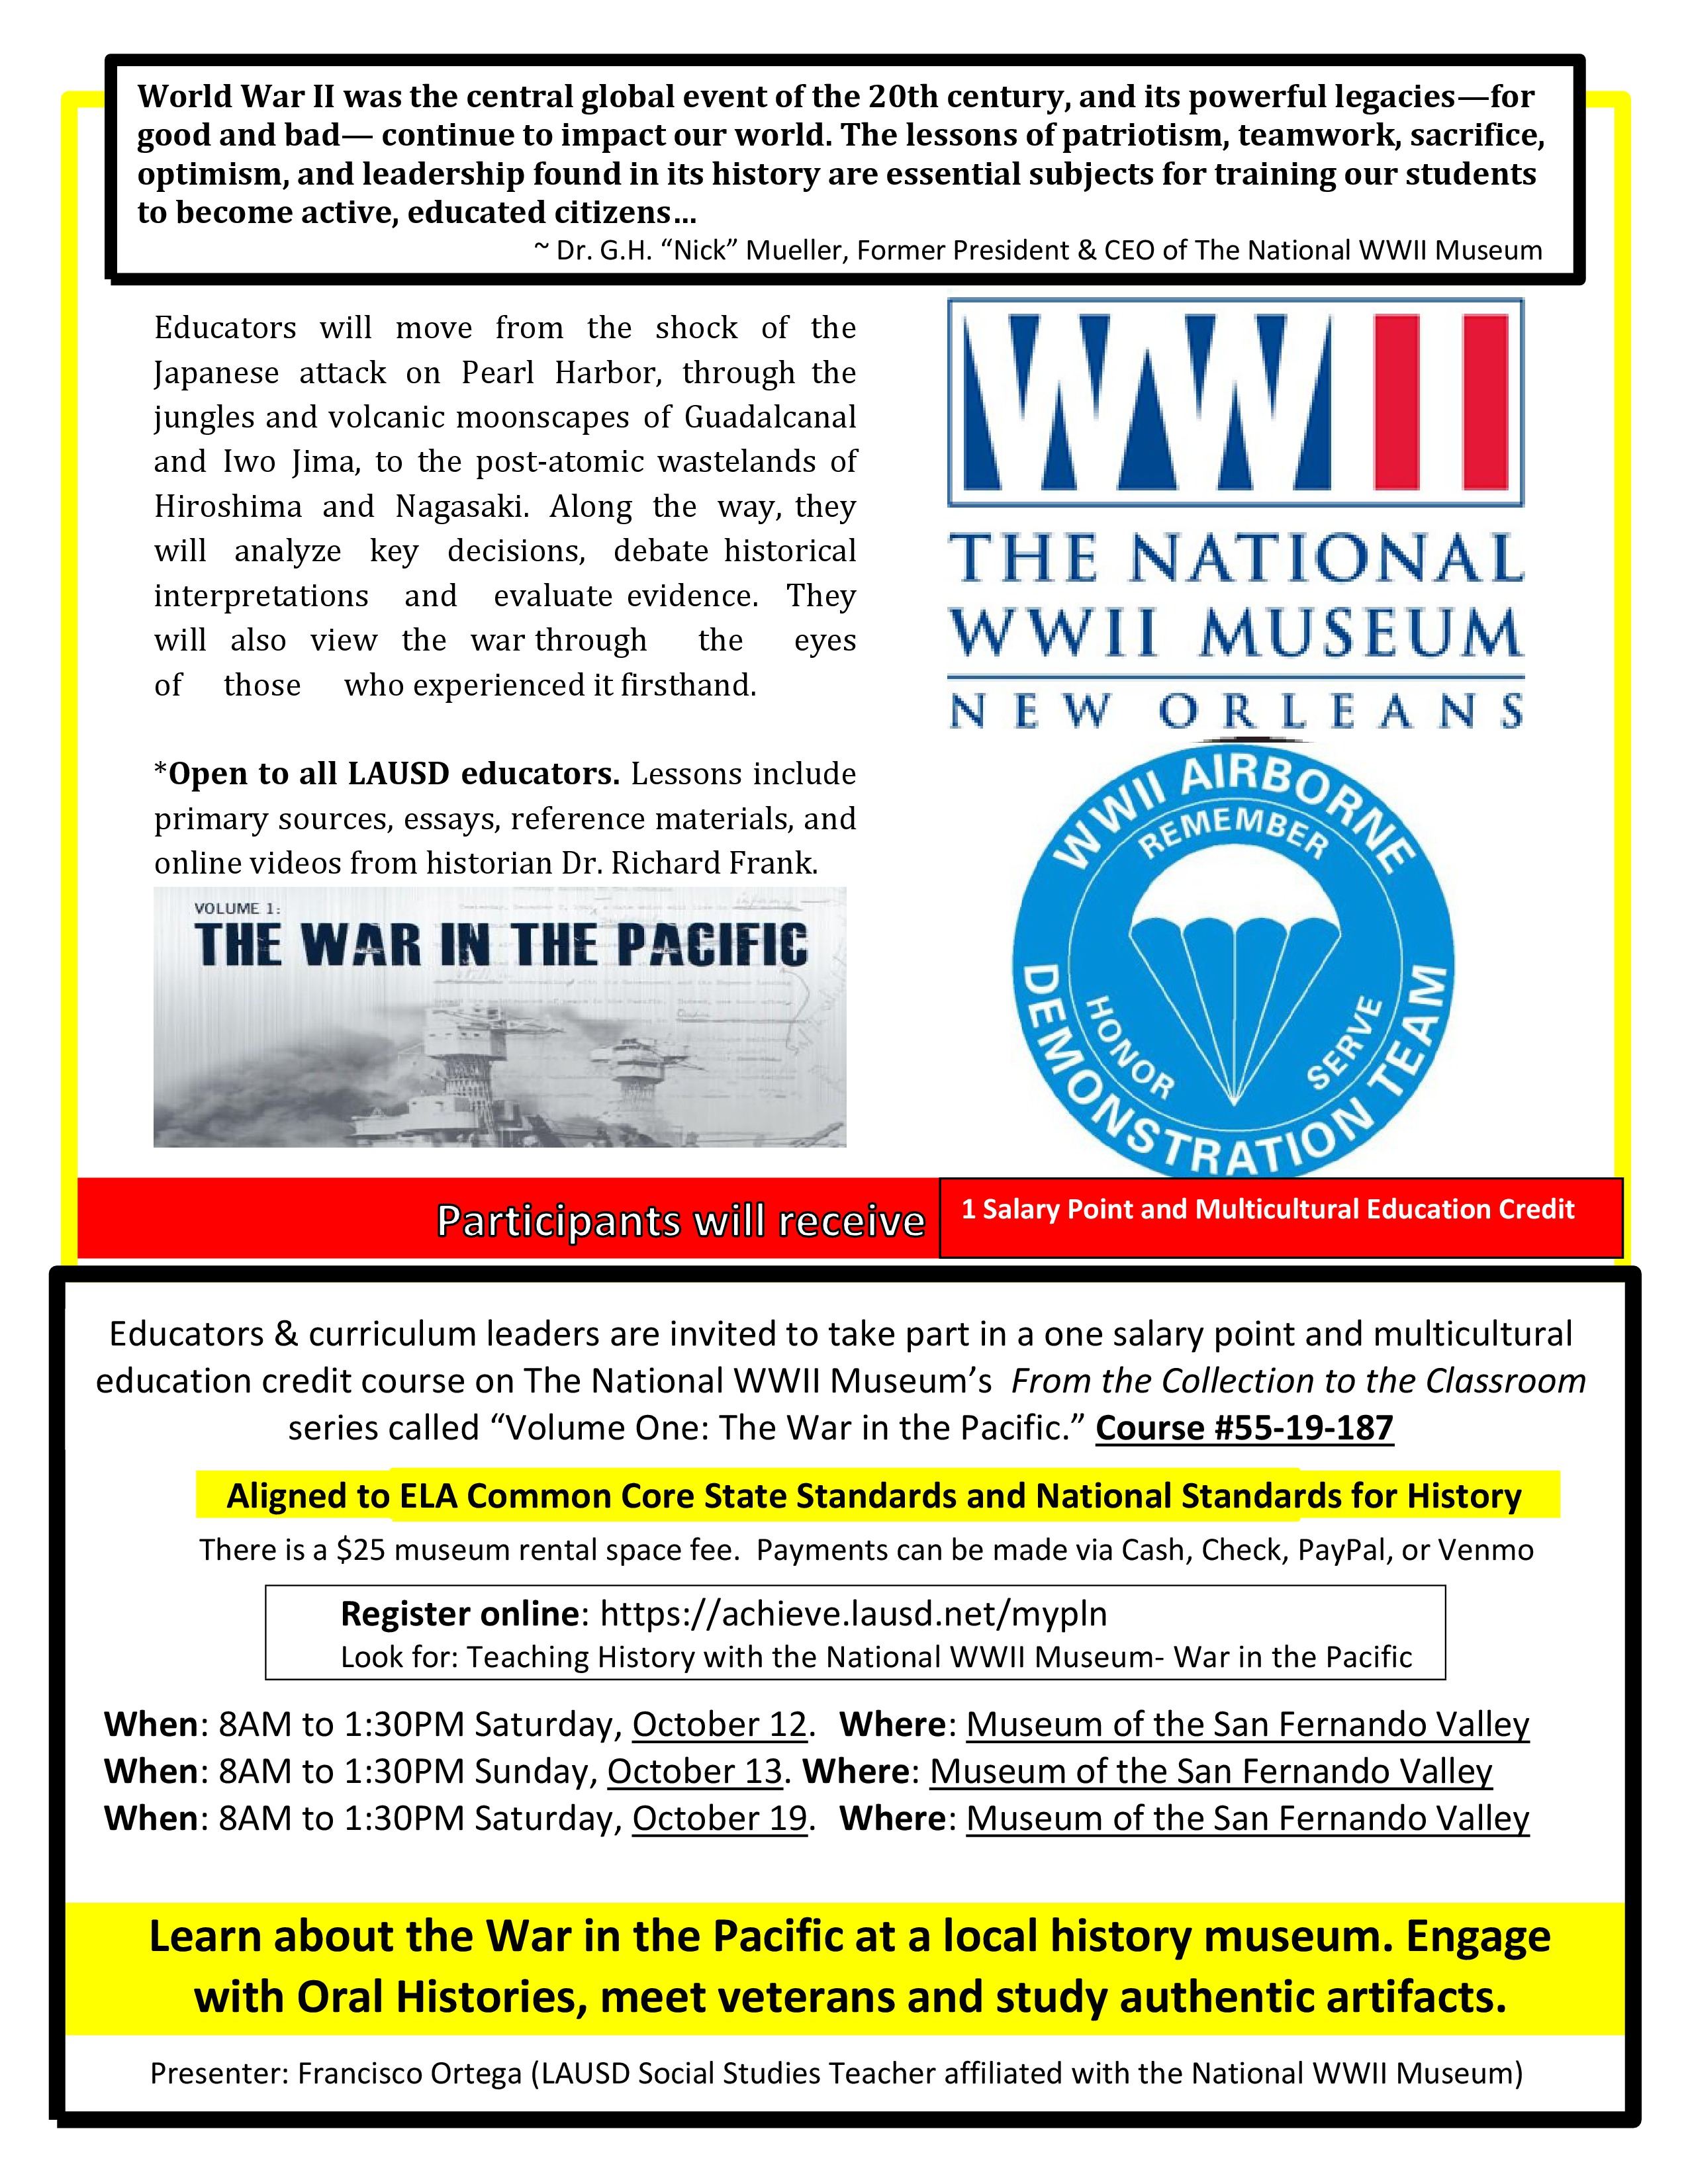 Attachment- Publicity Flyer WWII Museum - Spring 2019- War in Pacific